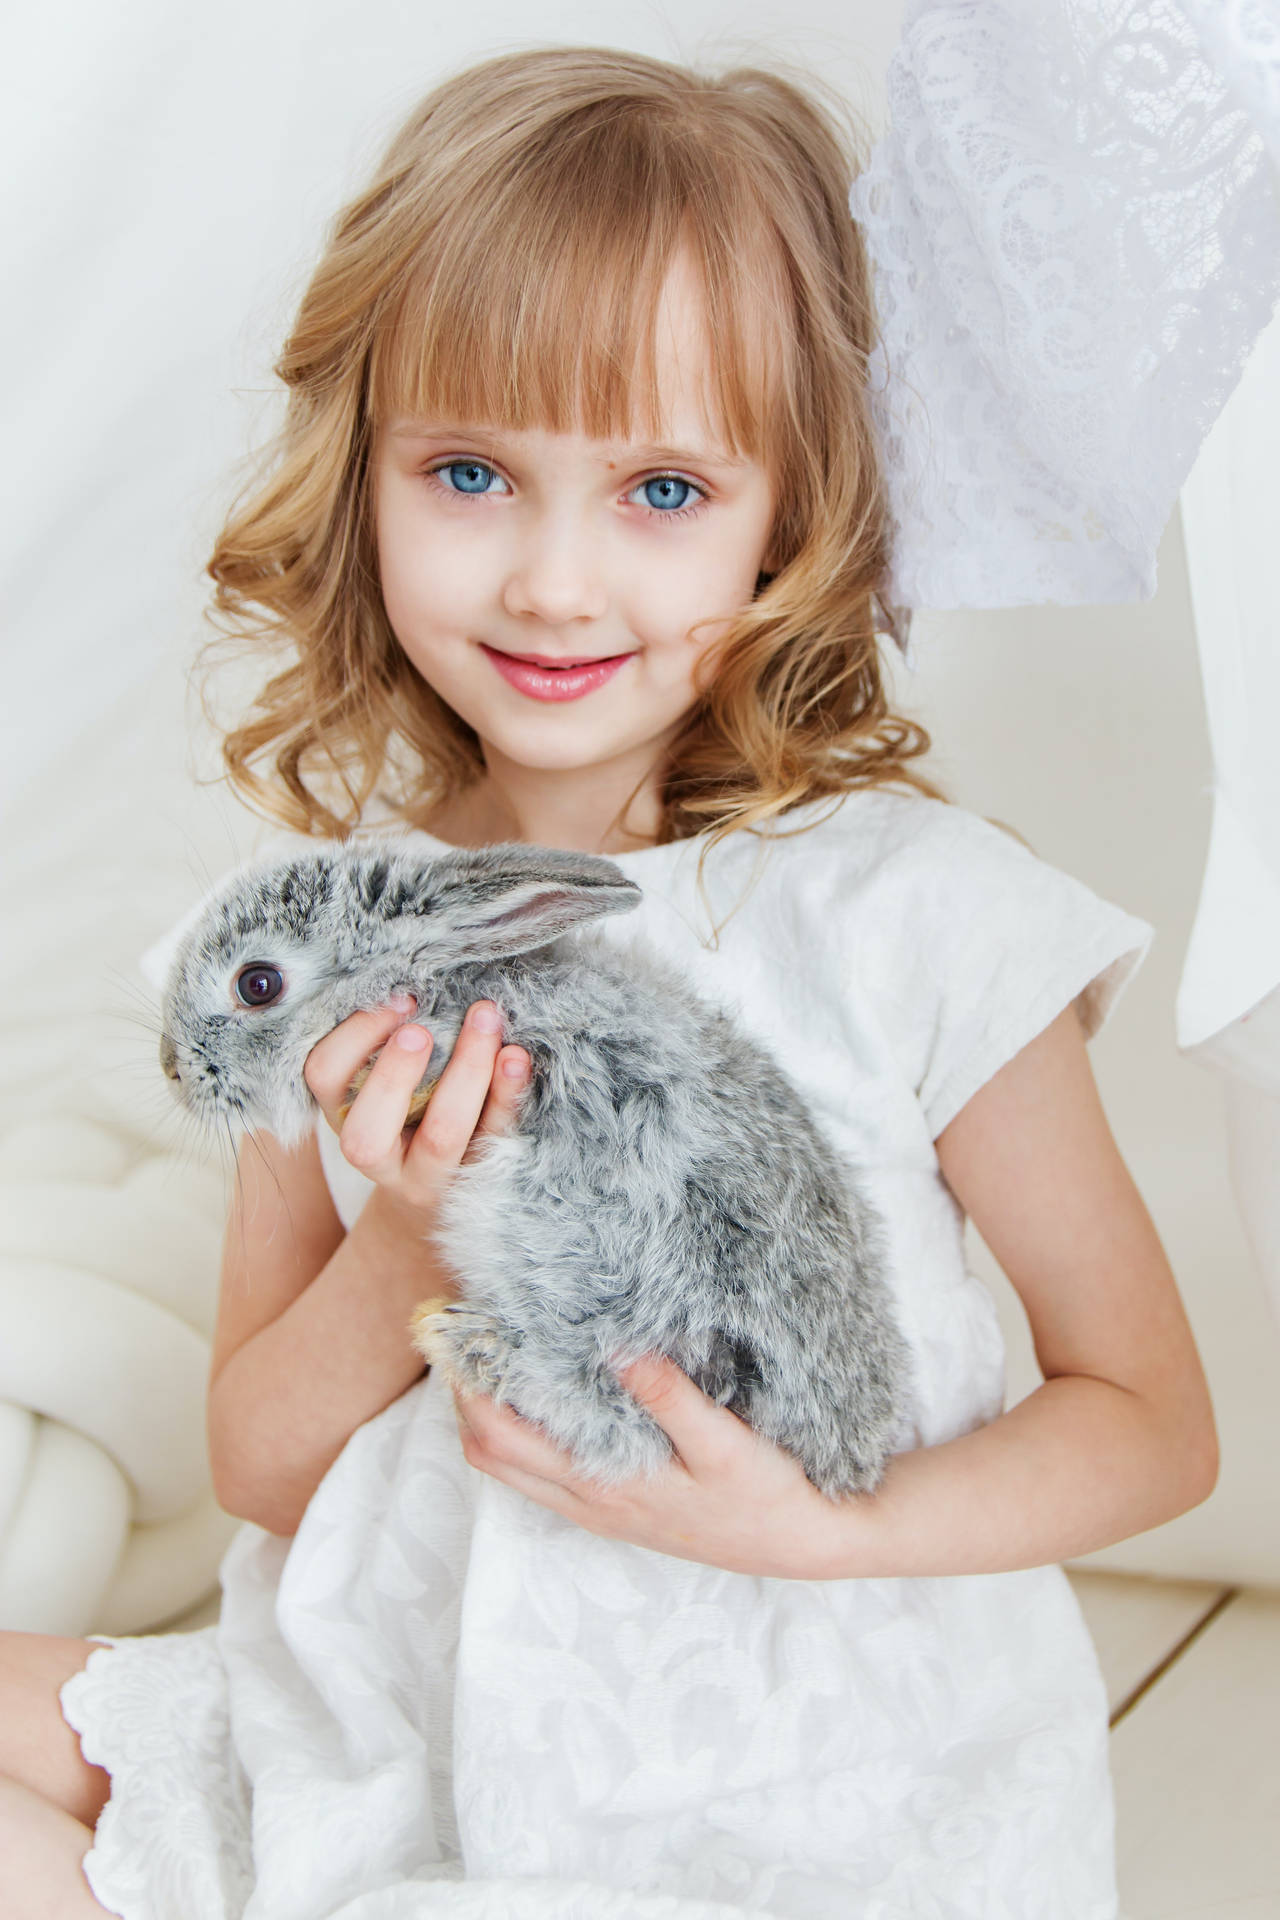 Cute Girl With Gray Rabbit Background